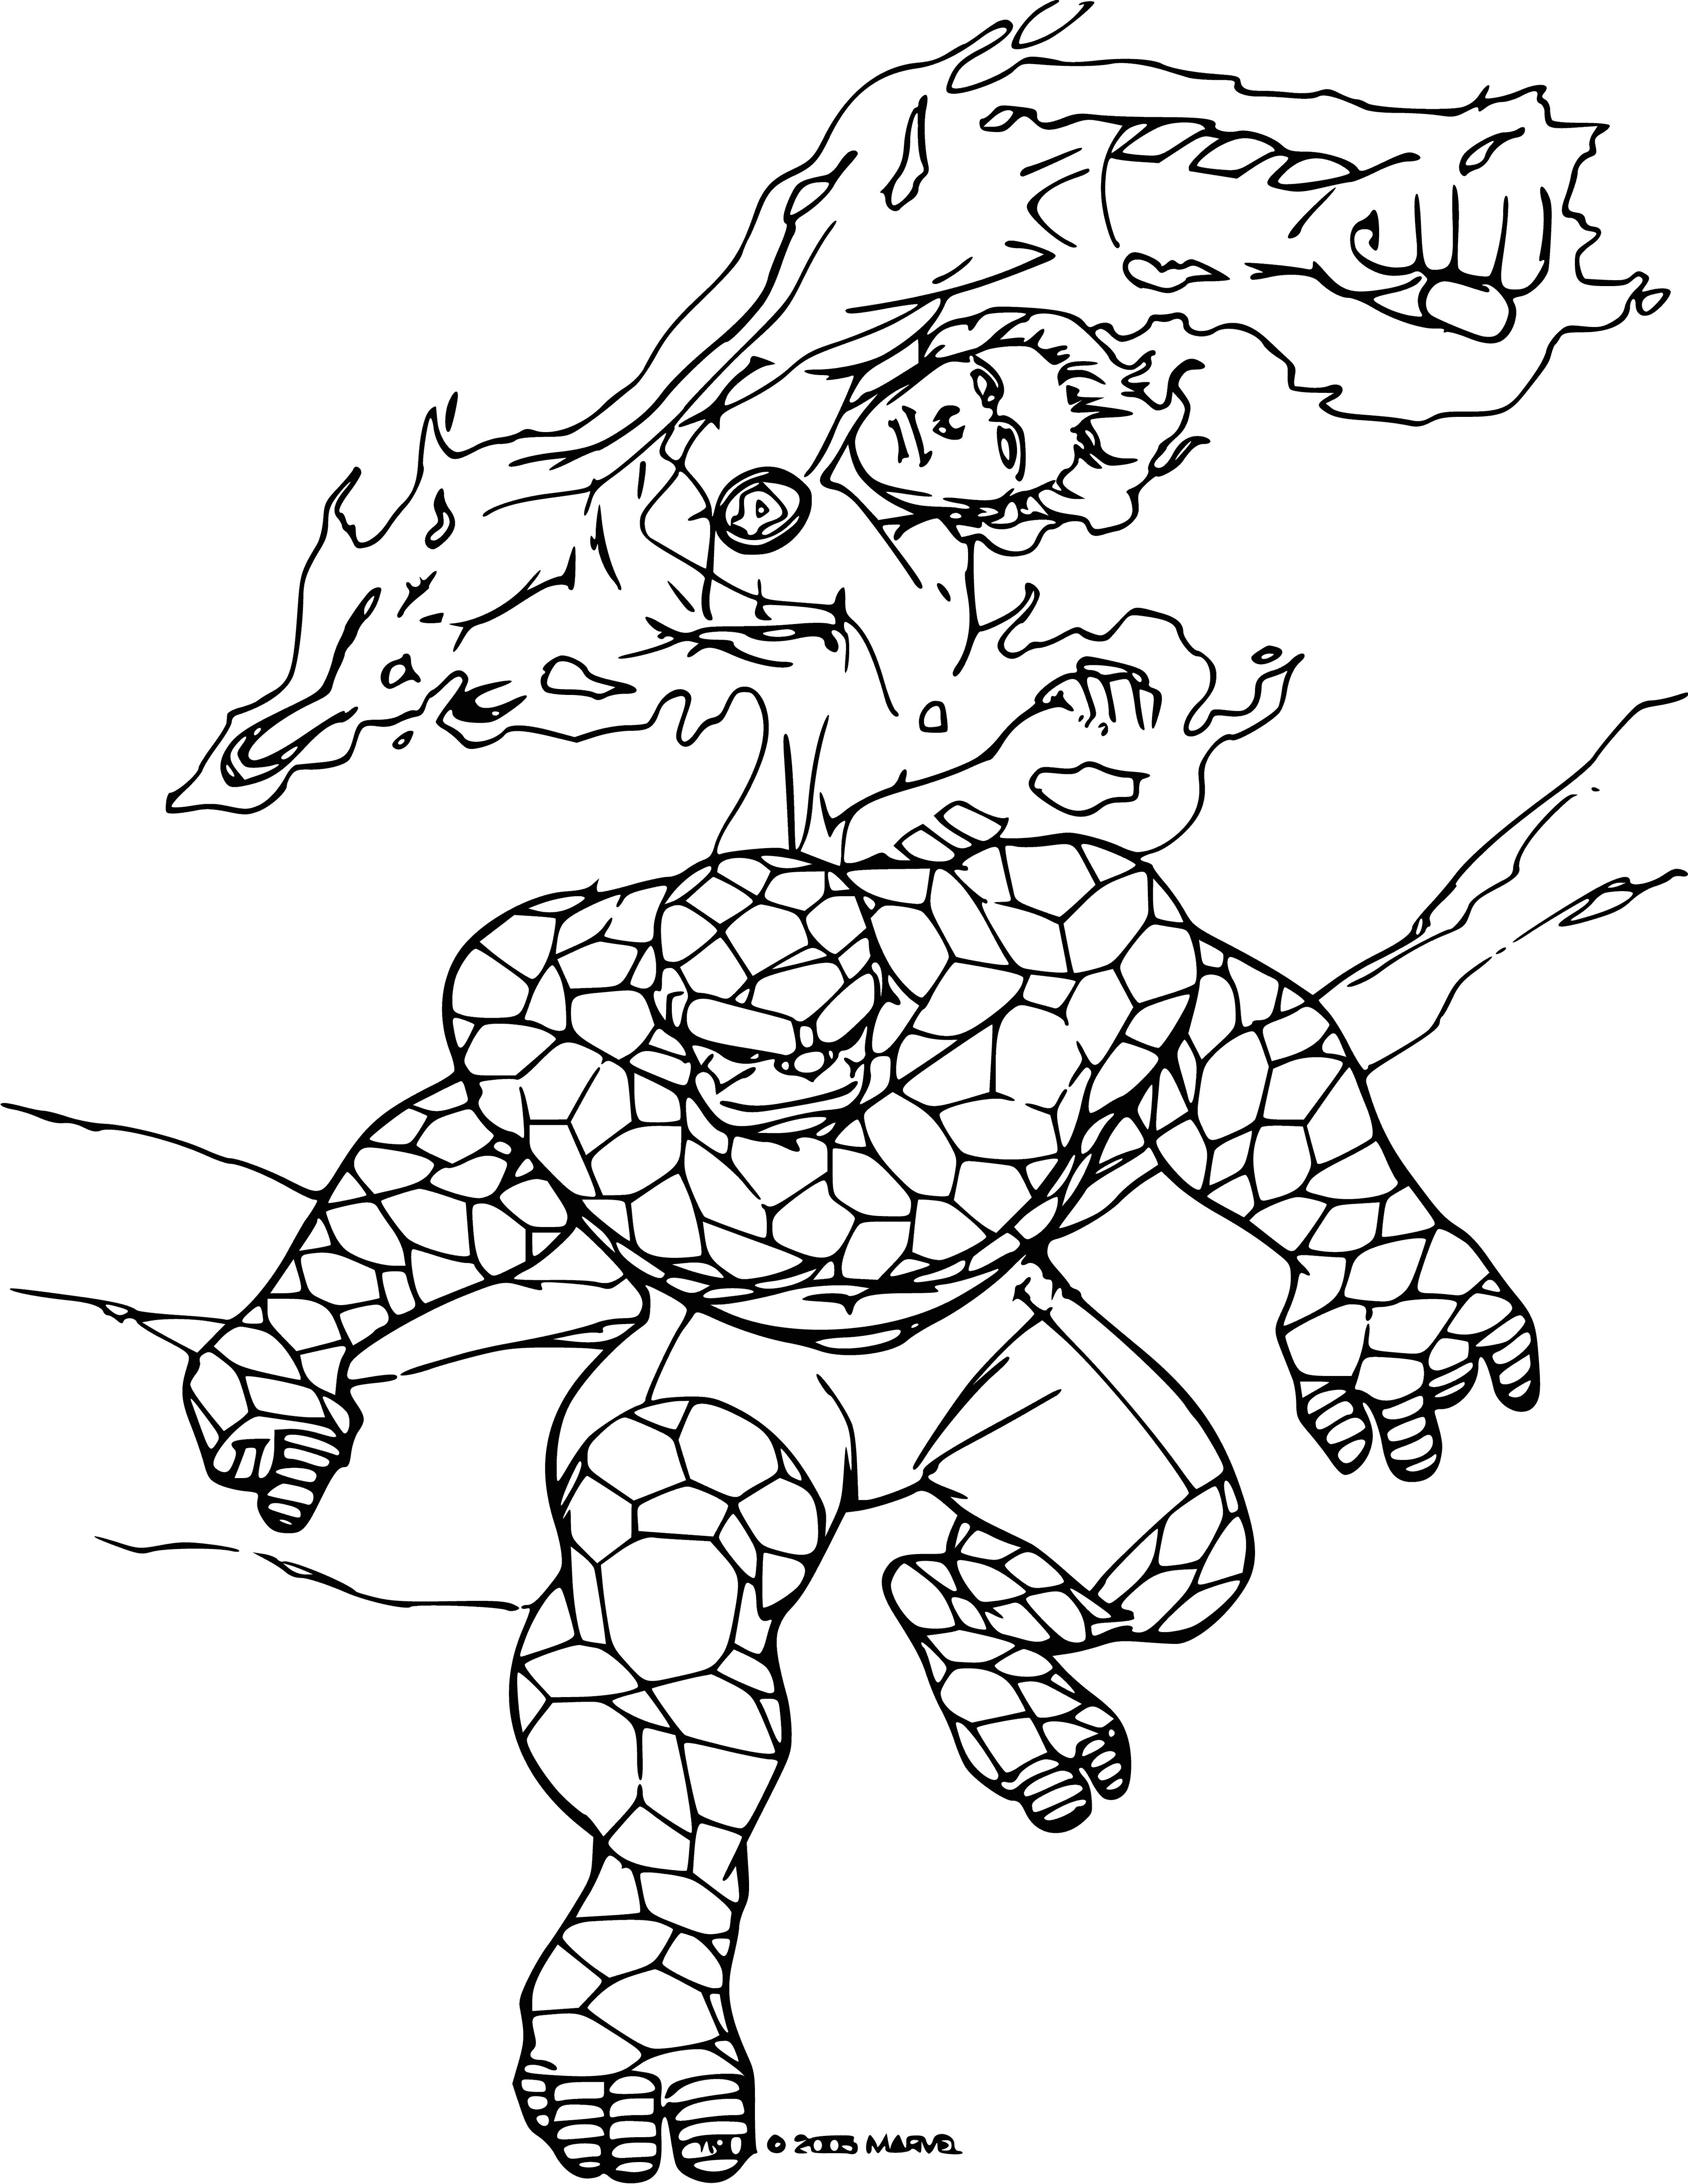 coloring page: Torch is a beautiful, powerful superhero with a flaming suit. She can fight and shoot fire. She's a key member of the Fantastic Four and helps take down villains! #FantasticFour #Superheroes